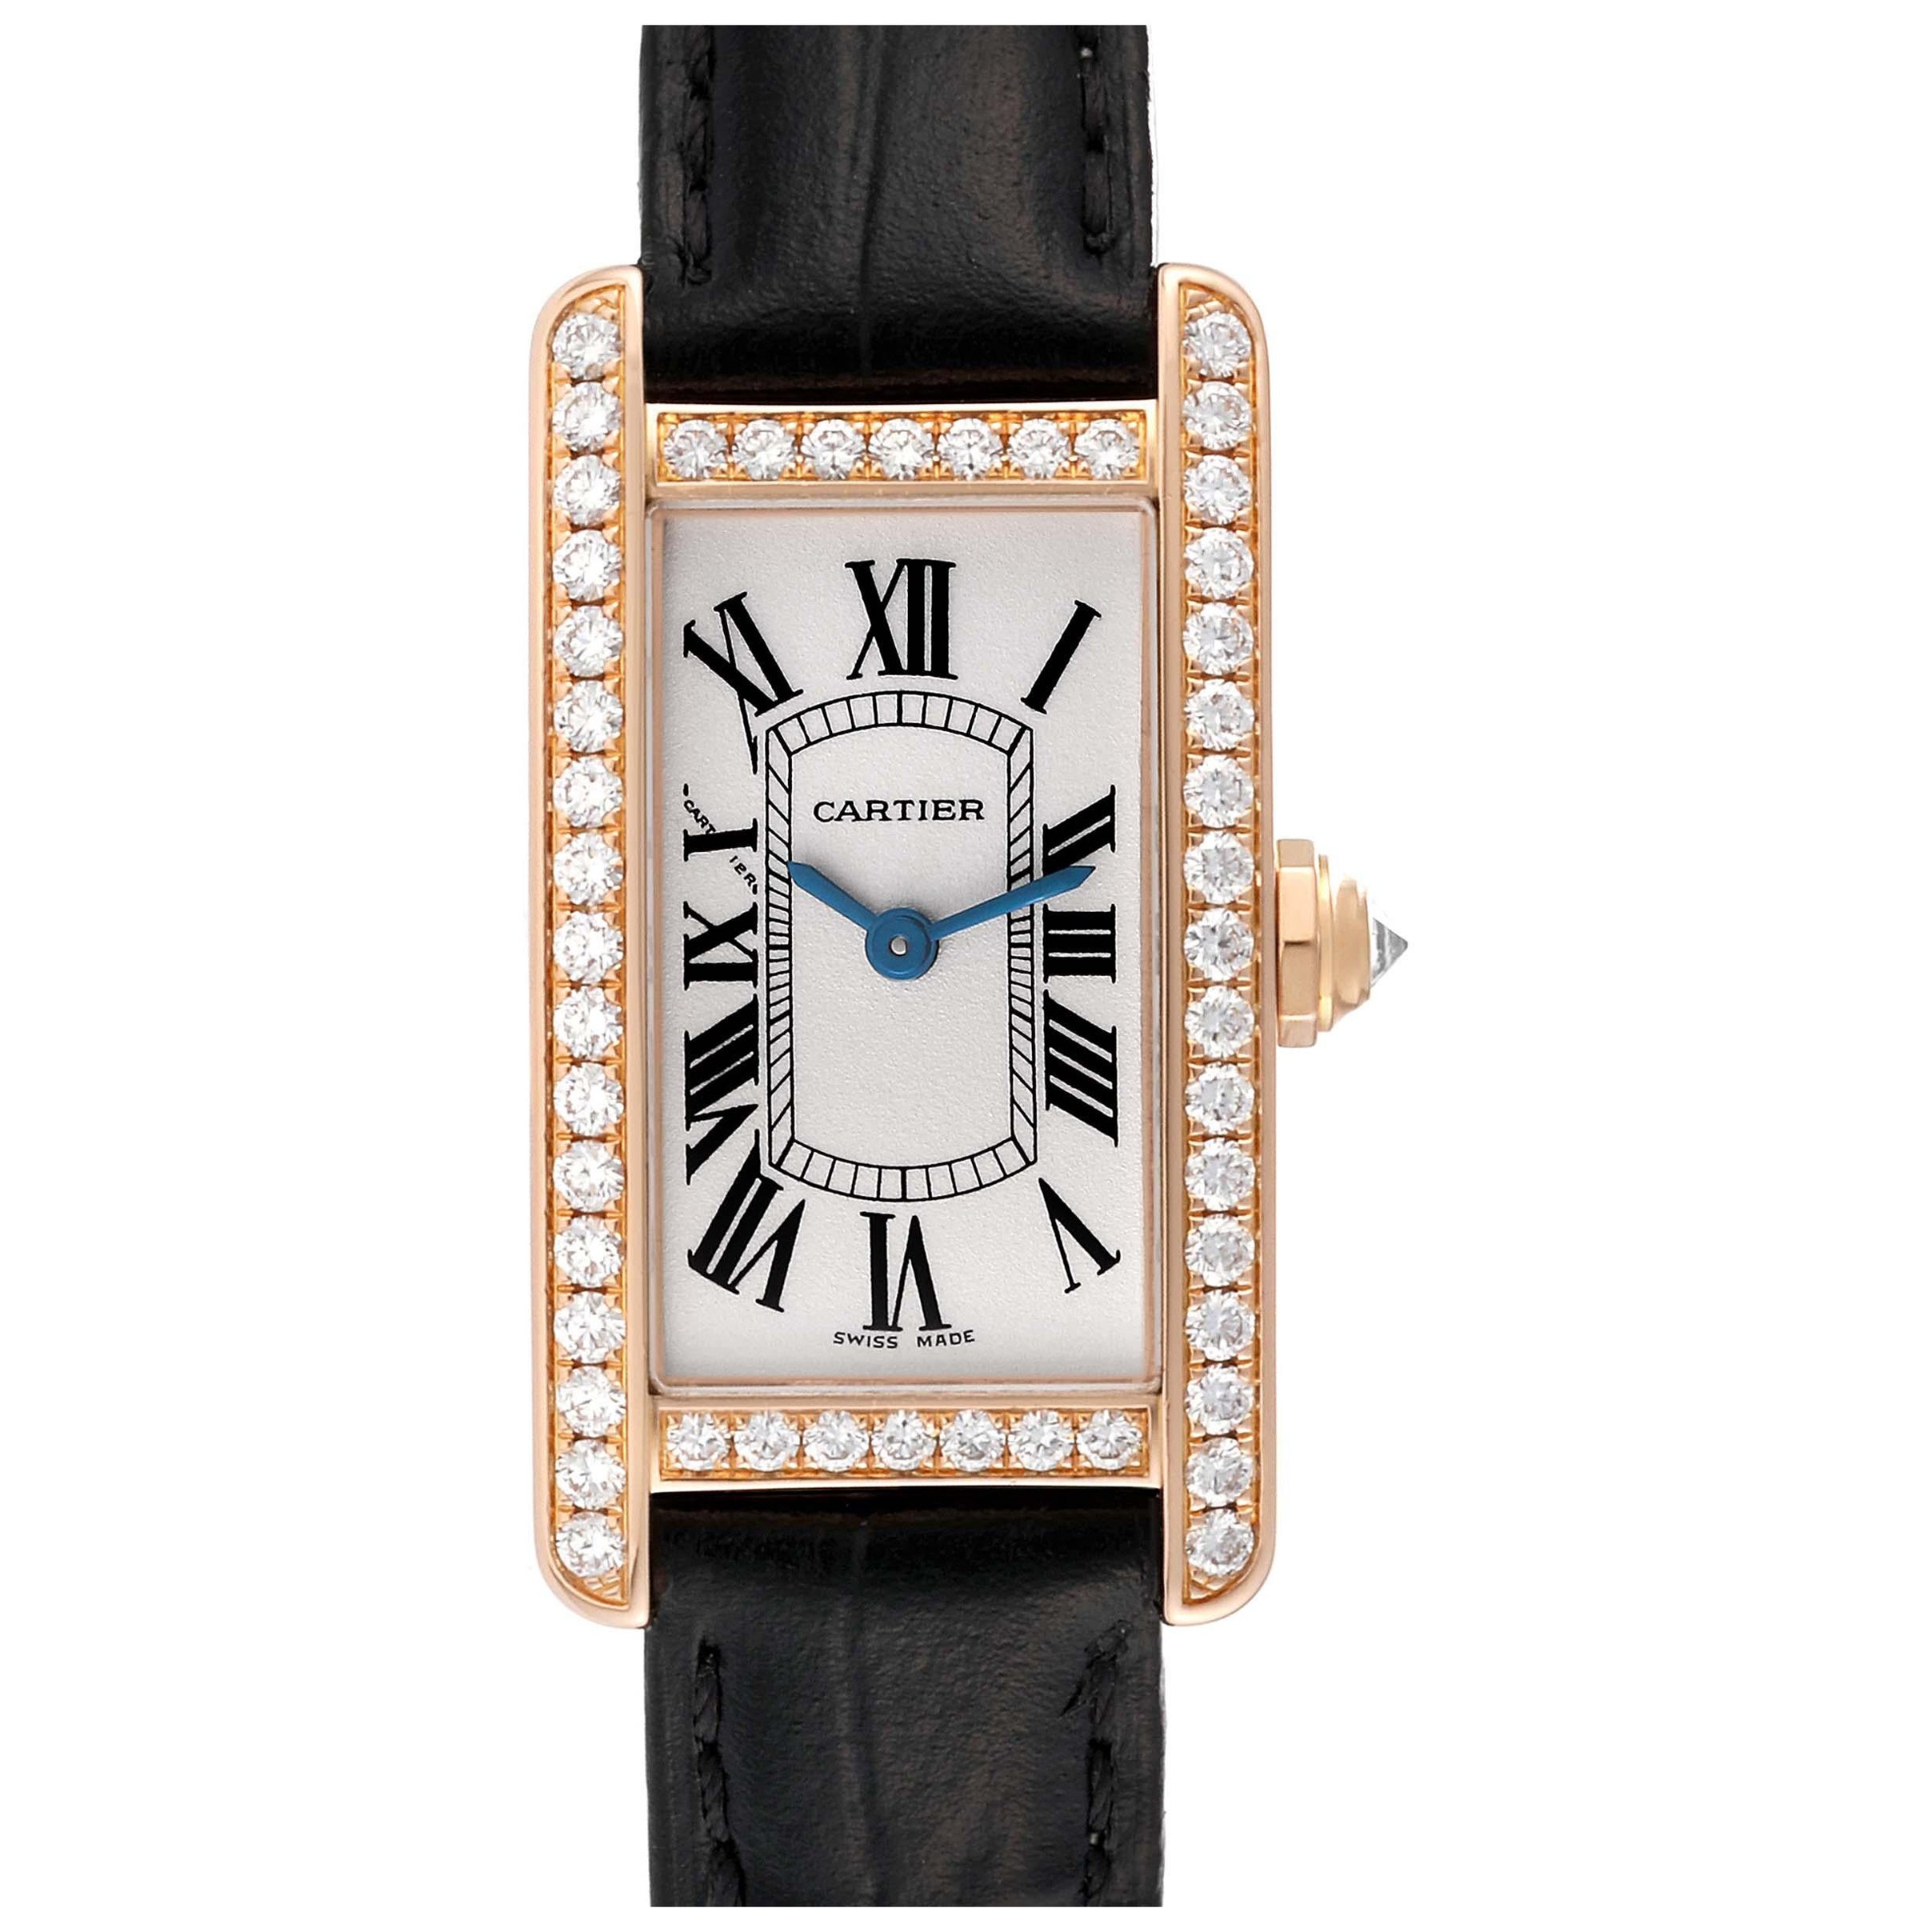 Cartier Tank Americaine Small Rose Gold Diamond Ladies Watch WJTA0002 For Sale